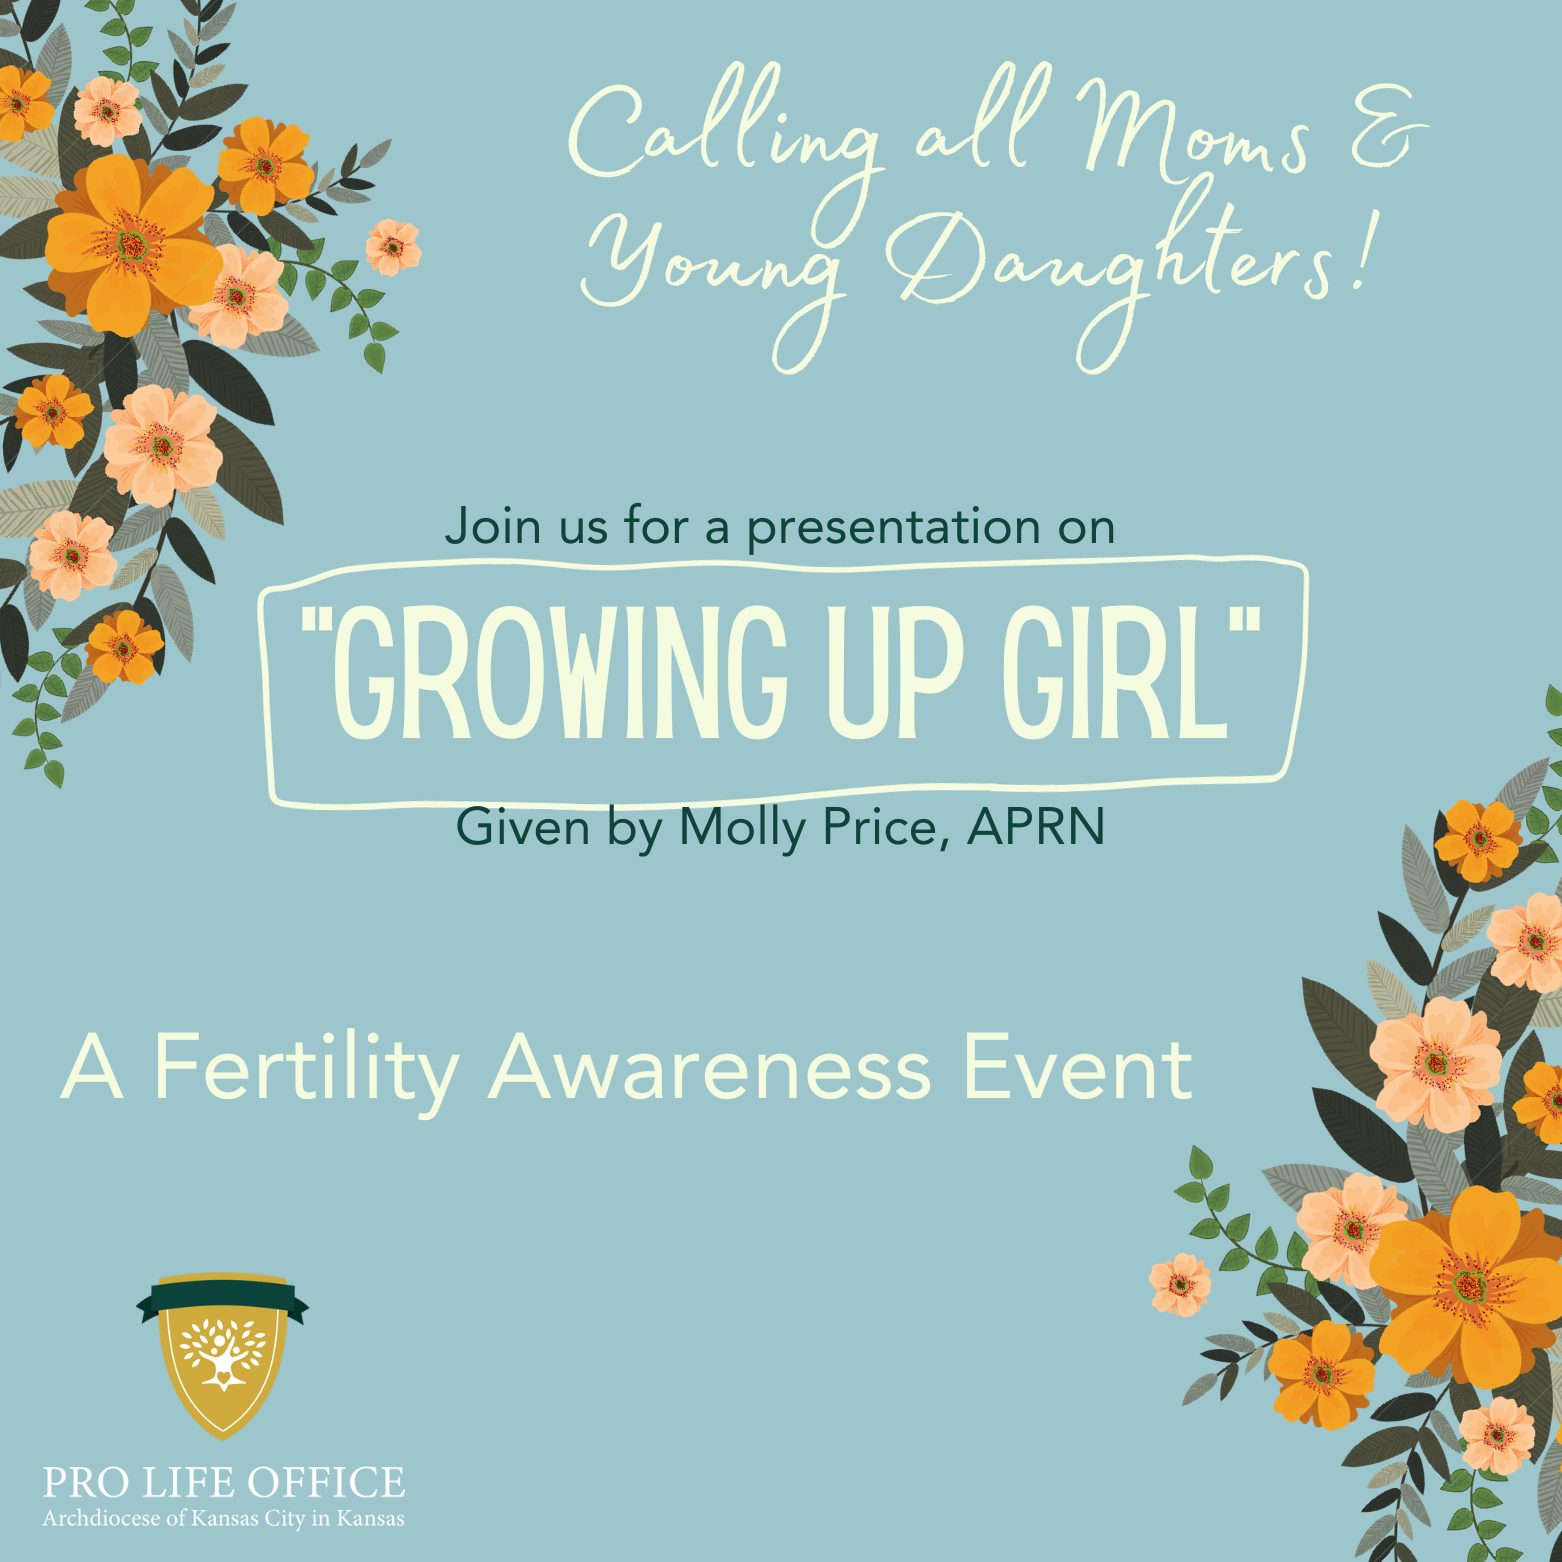 Growing Up Girls Event Image